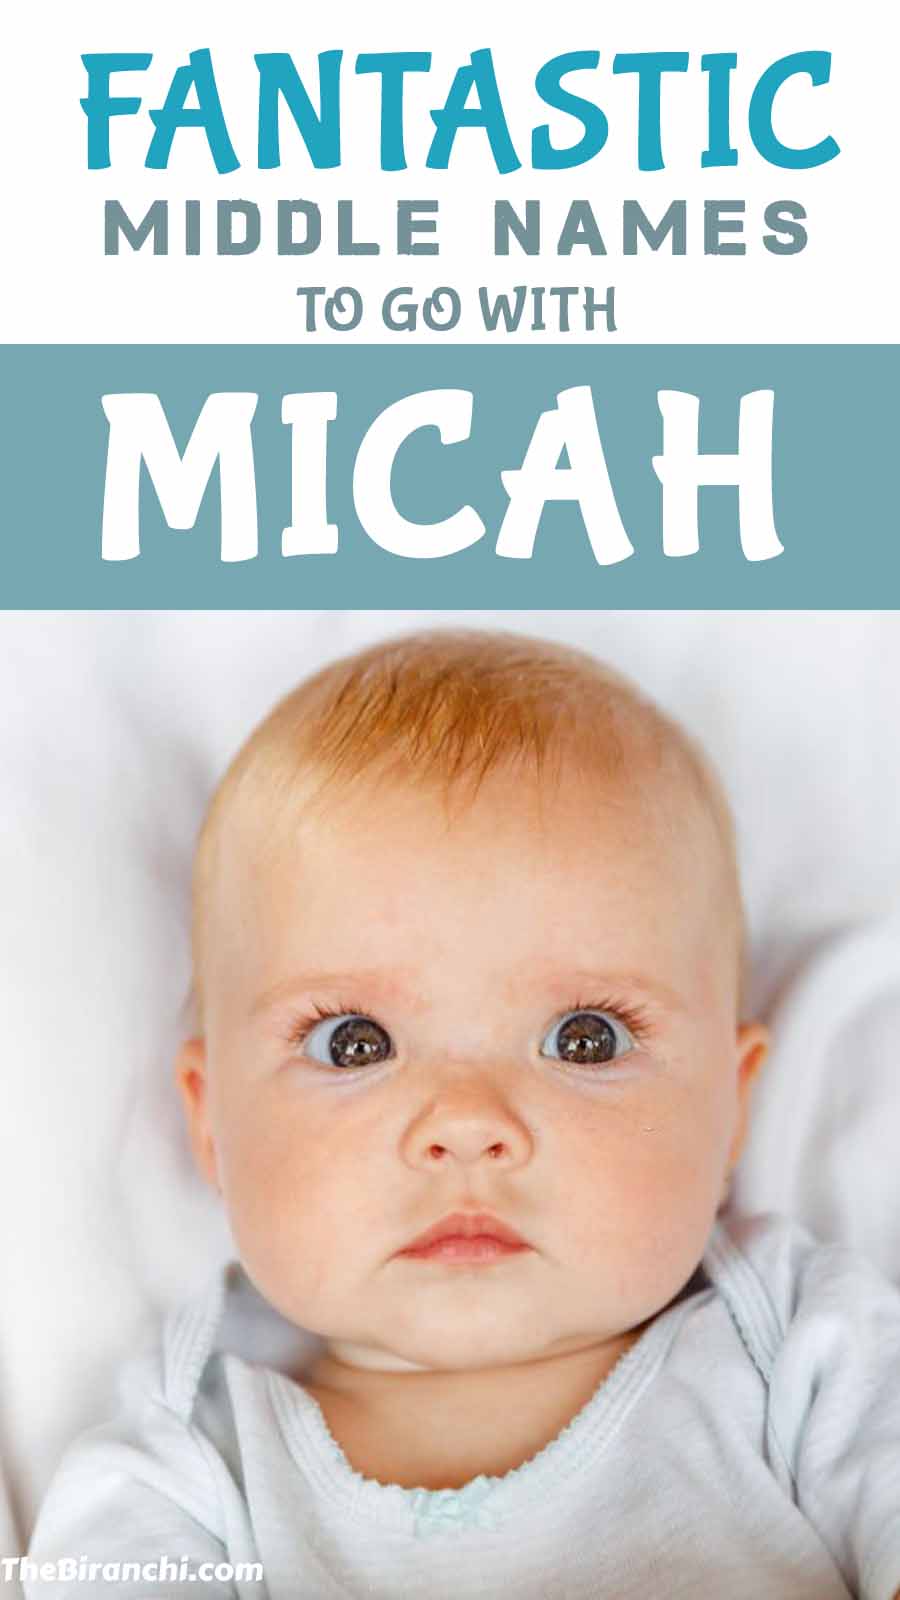 fantastic-middle-names-to-go-with-micah